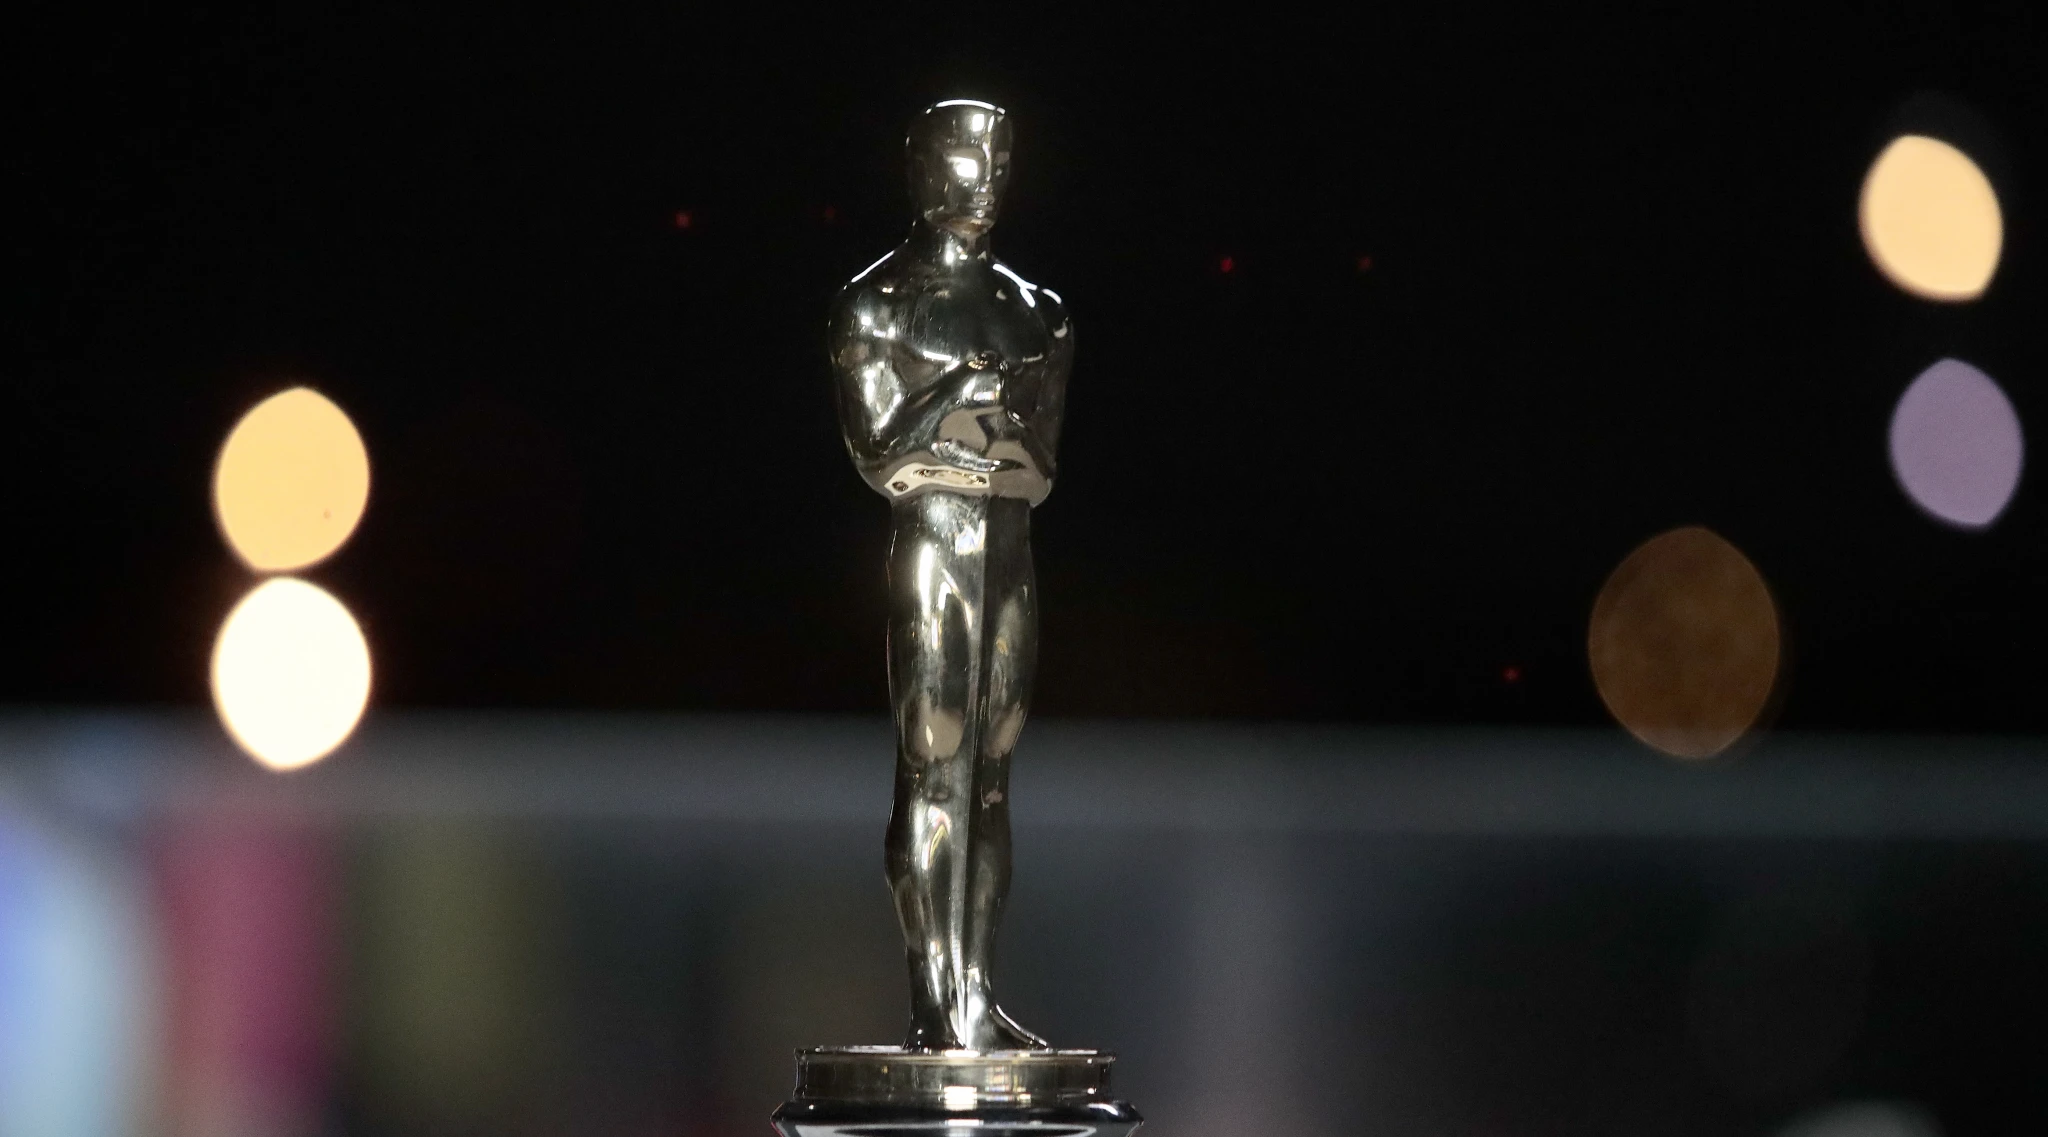 94th Oscars Shortlists In 10 Award Categories Announced